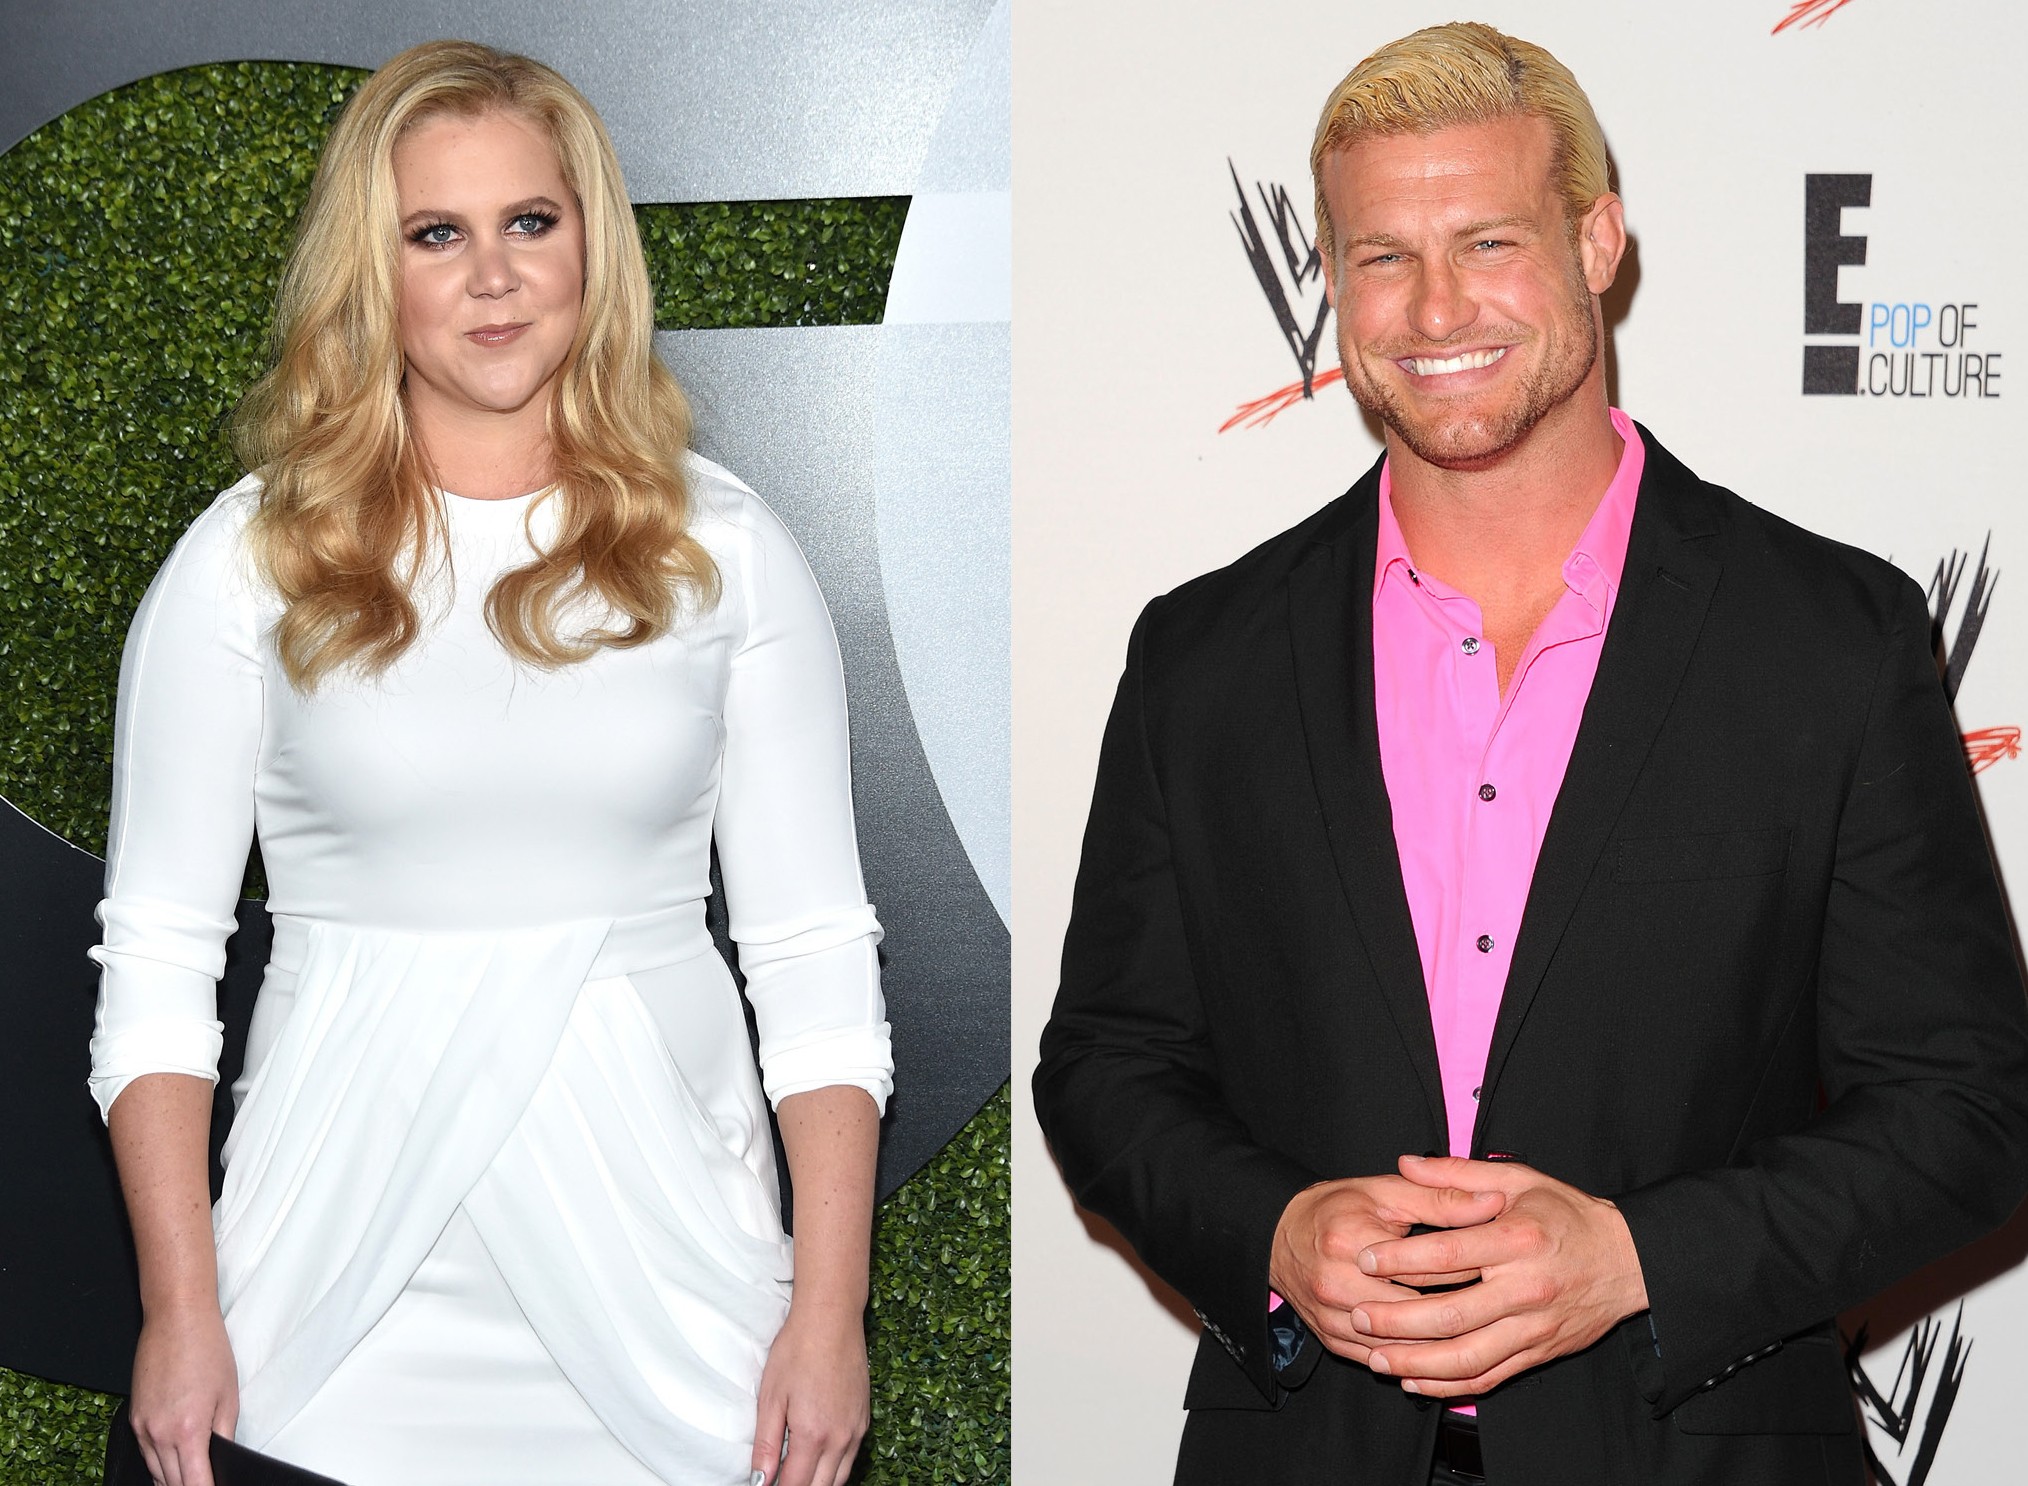 Amy Schumer e Dolph Ziggler (Foto: Getty Images)